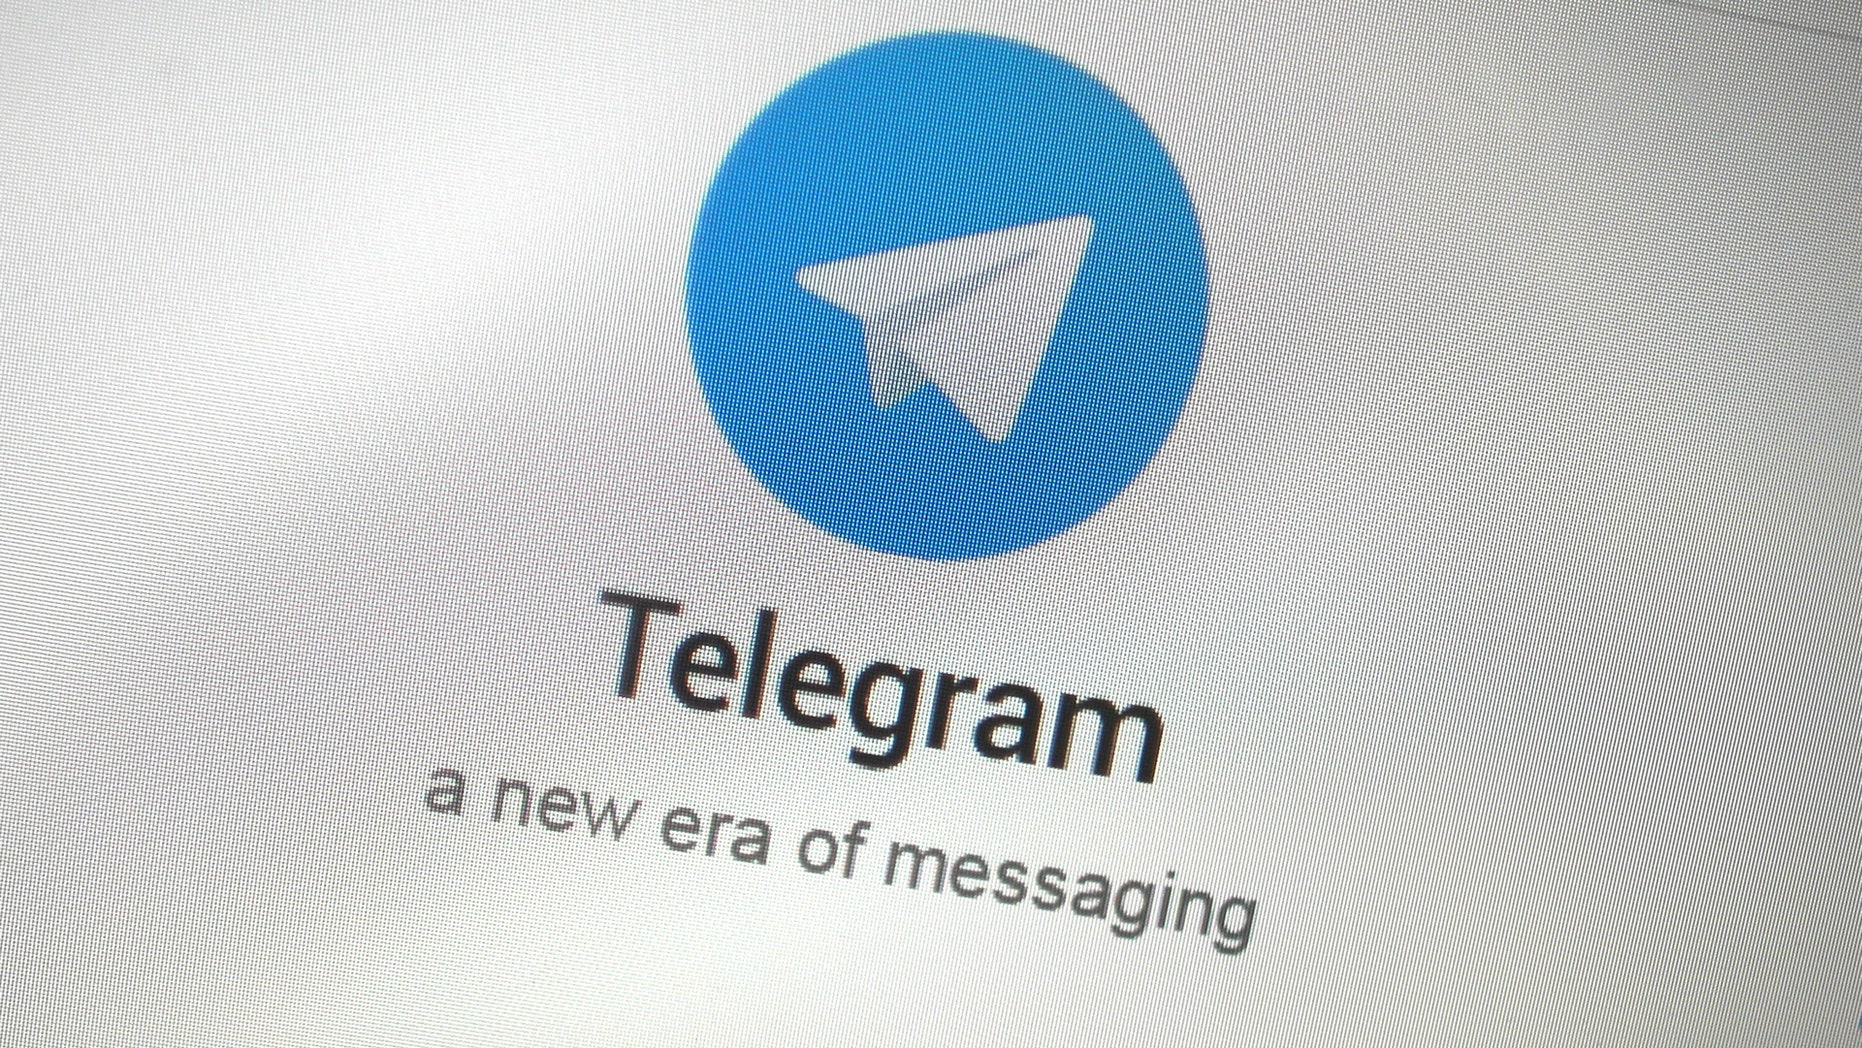 Telegram App Reportedly Involved As Isis Claims Responsibility For 2733